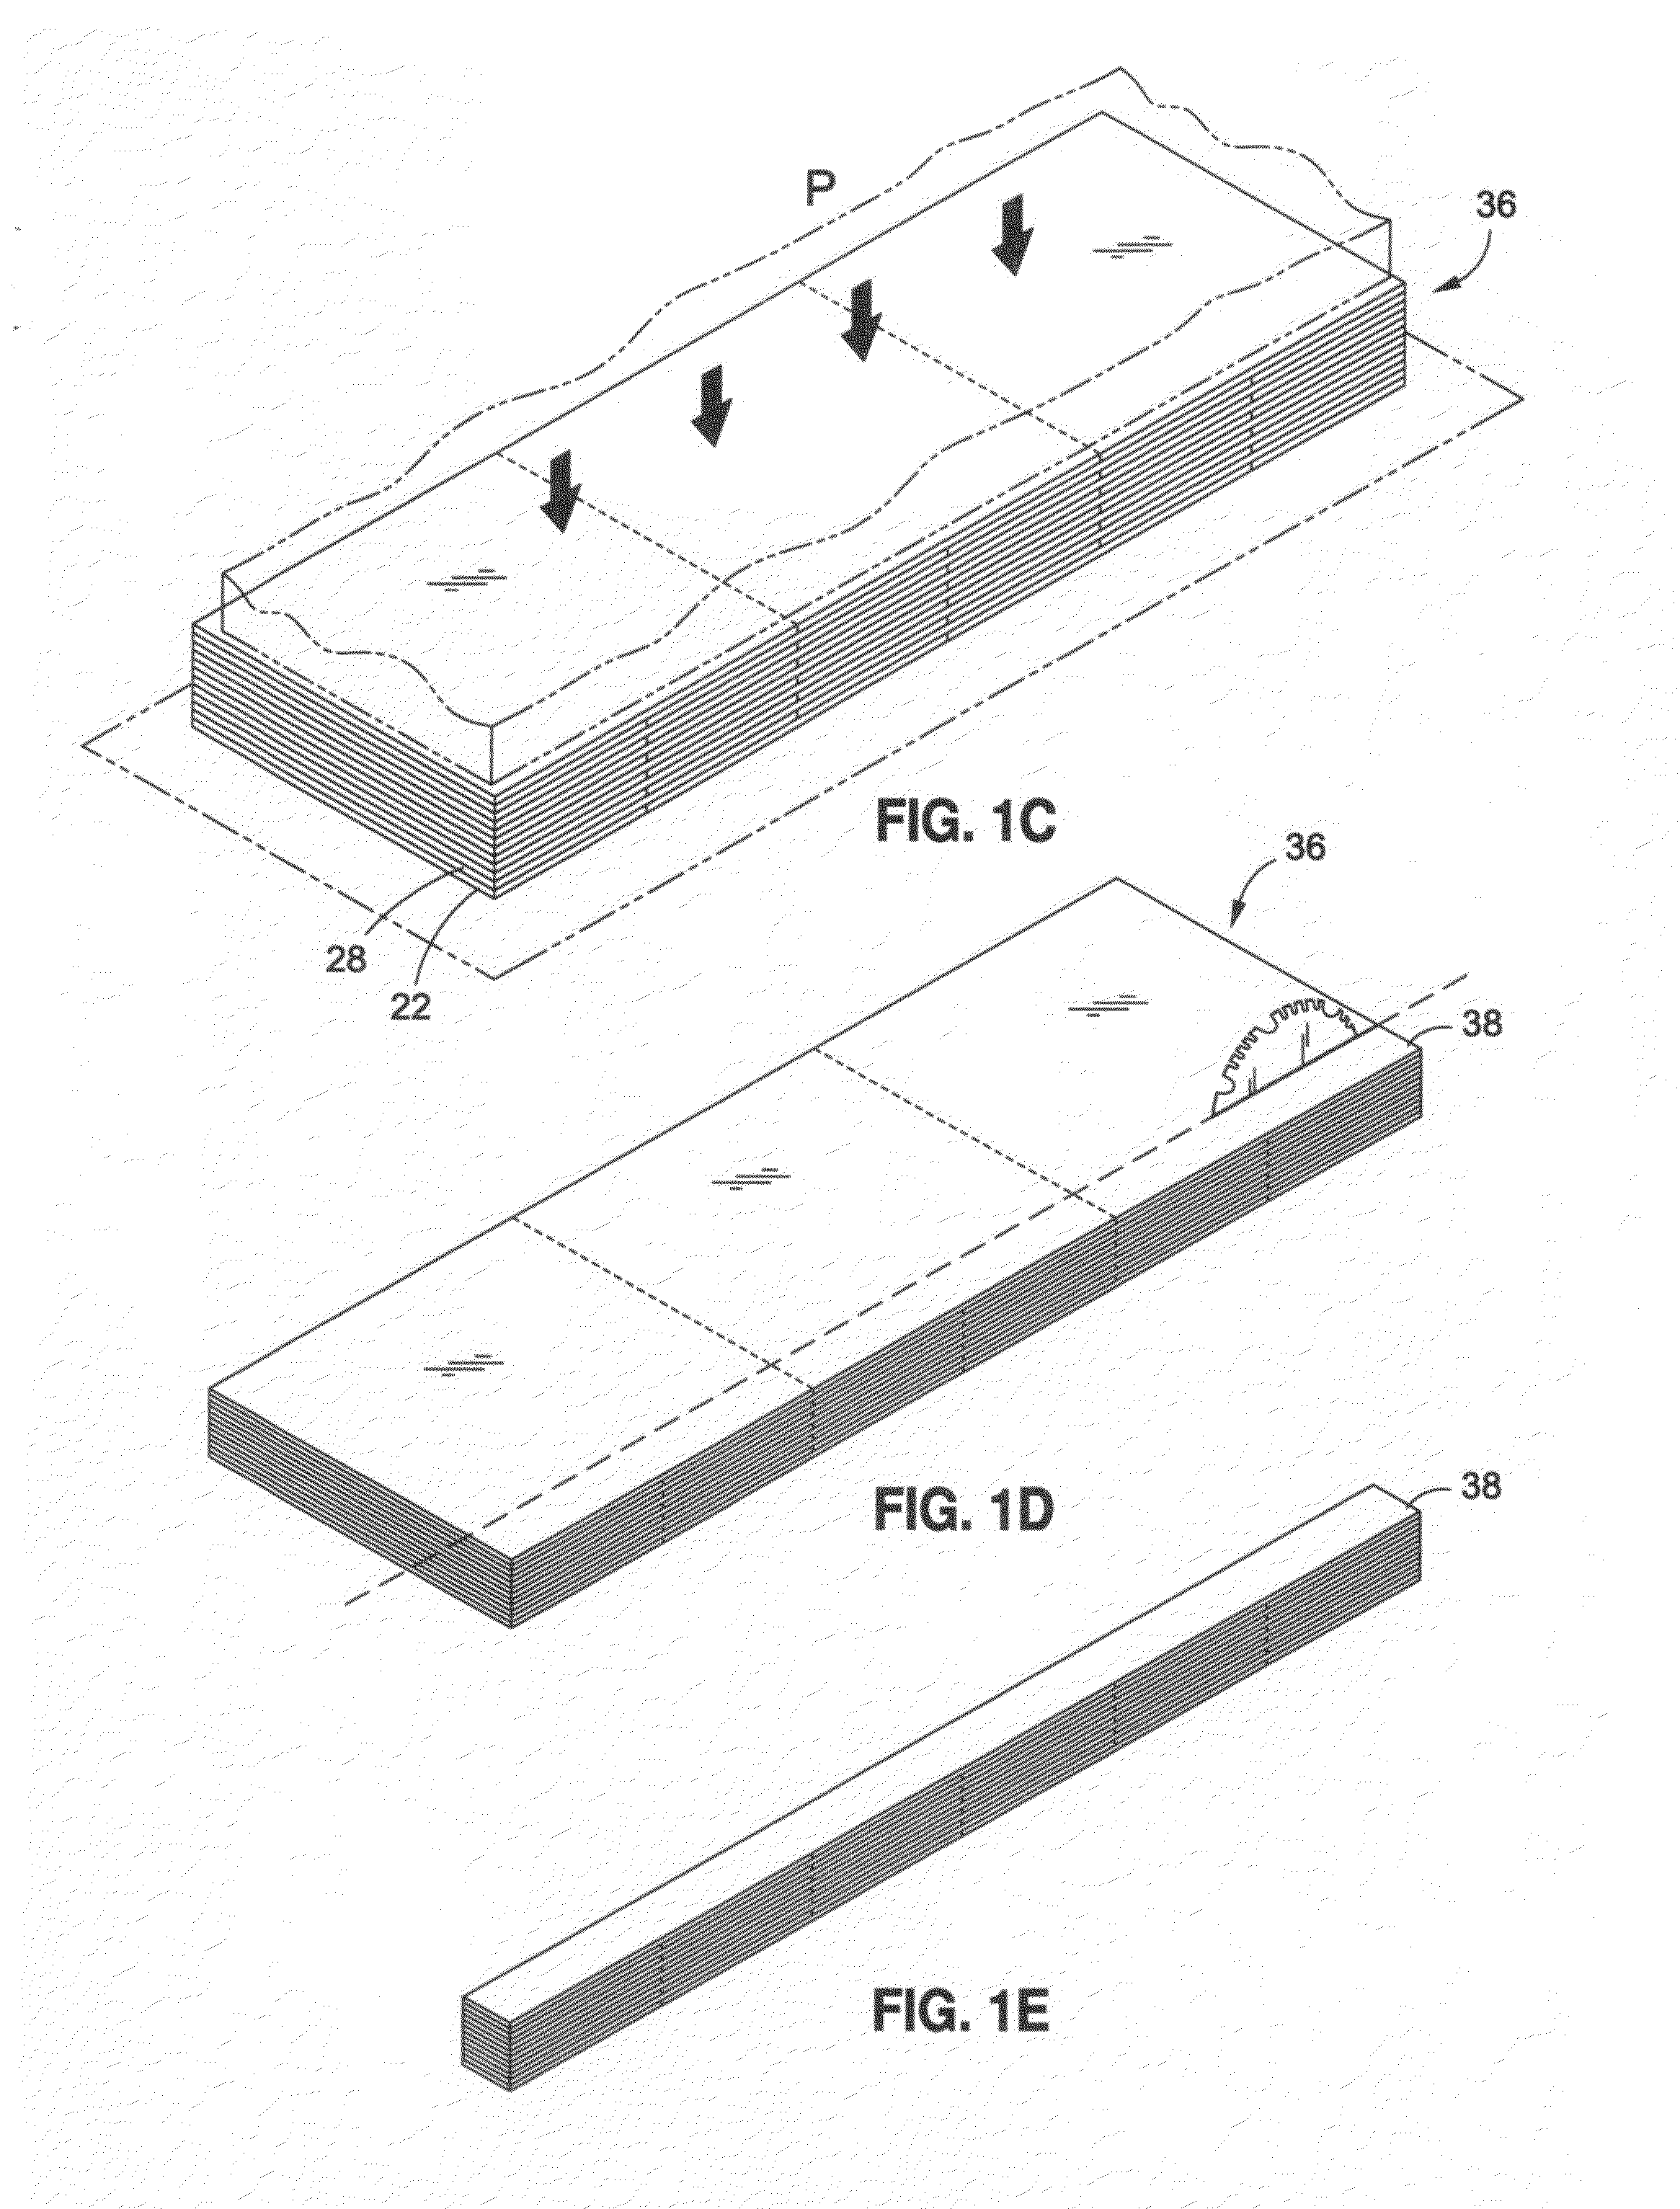 Method and system for interconnecting structural panels